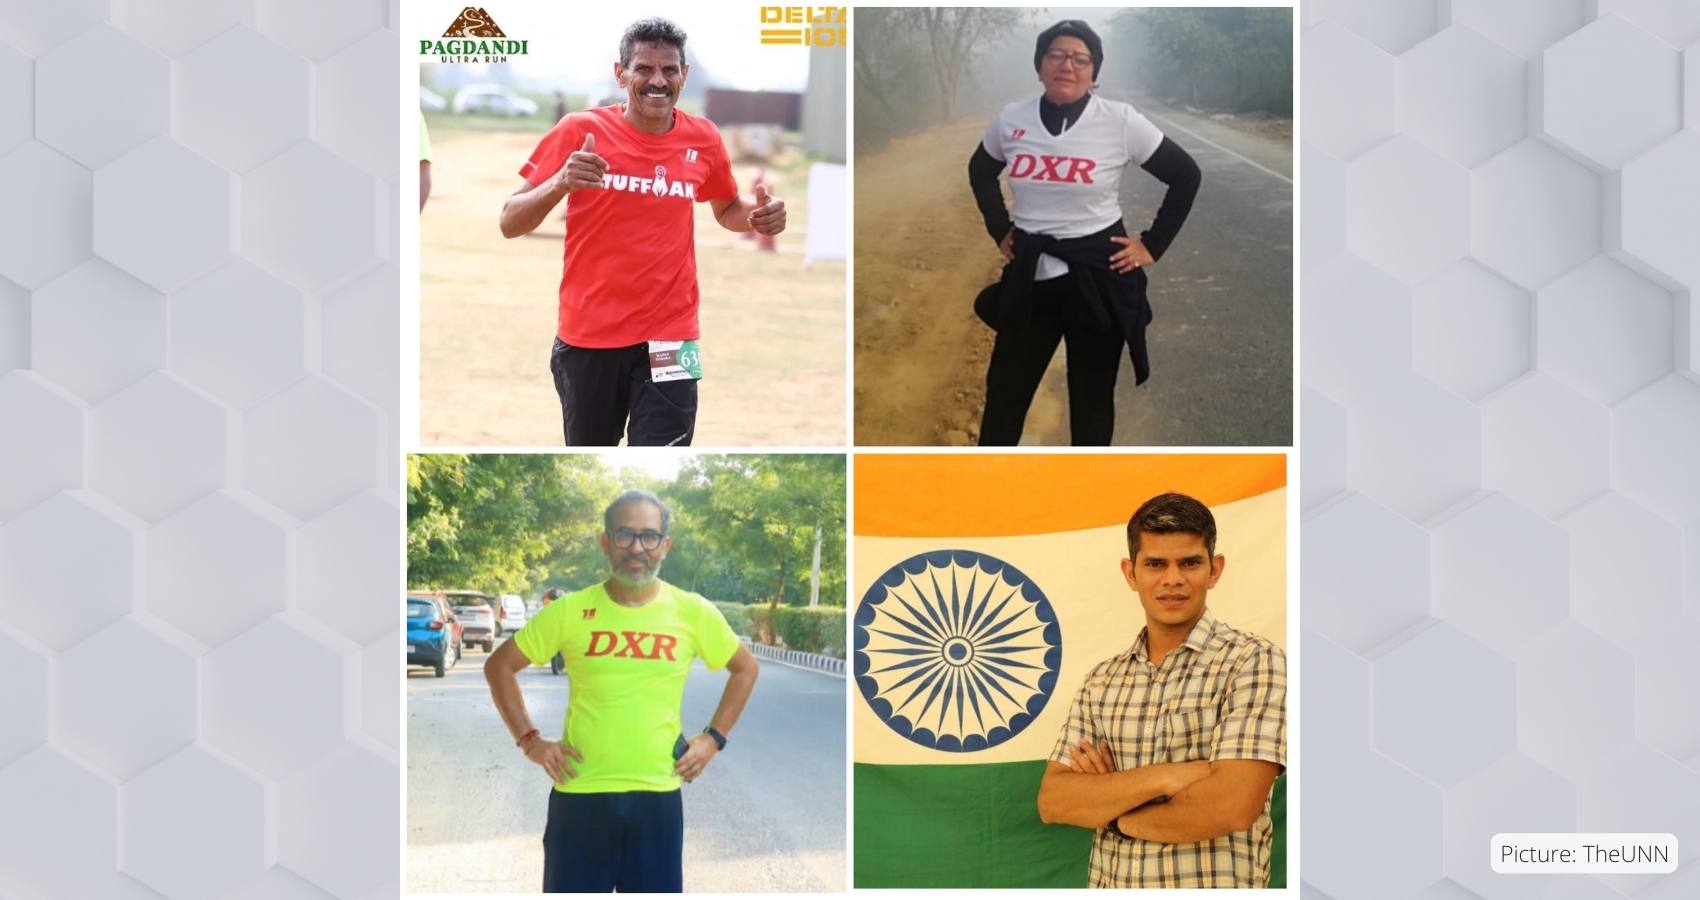 The Incredible “Everyday Elite” runners of India